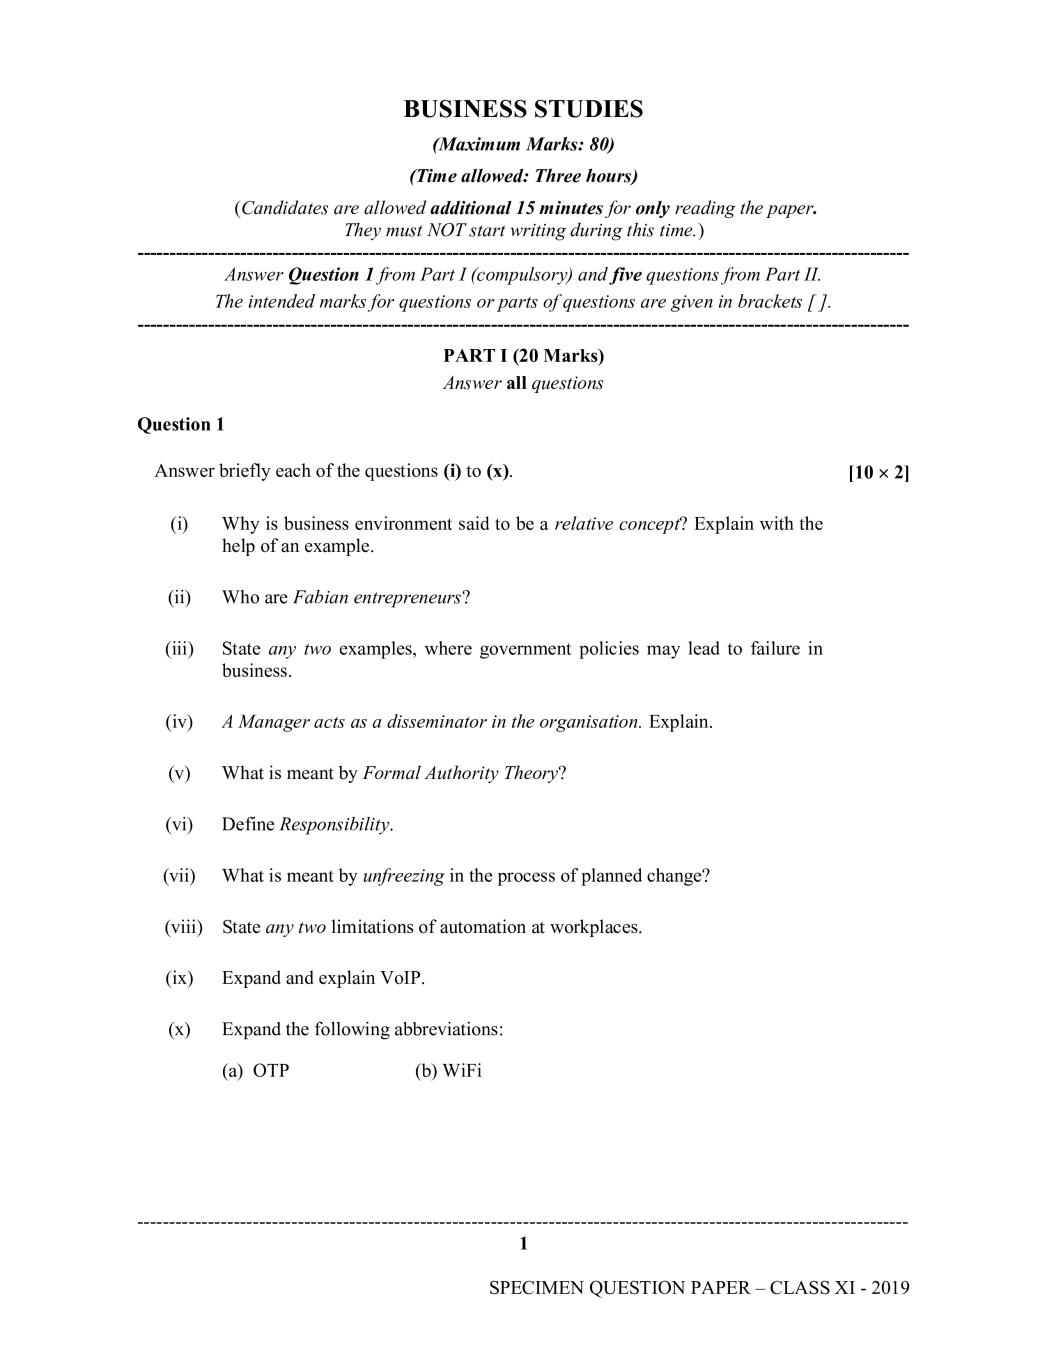 ISC Class 11 Specimen Paper for Business Studies - Page 1